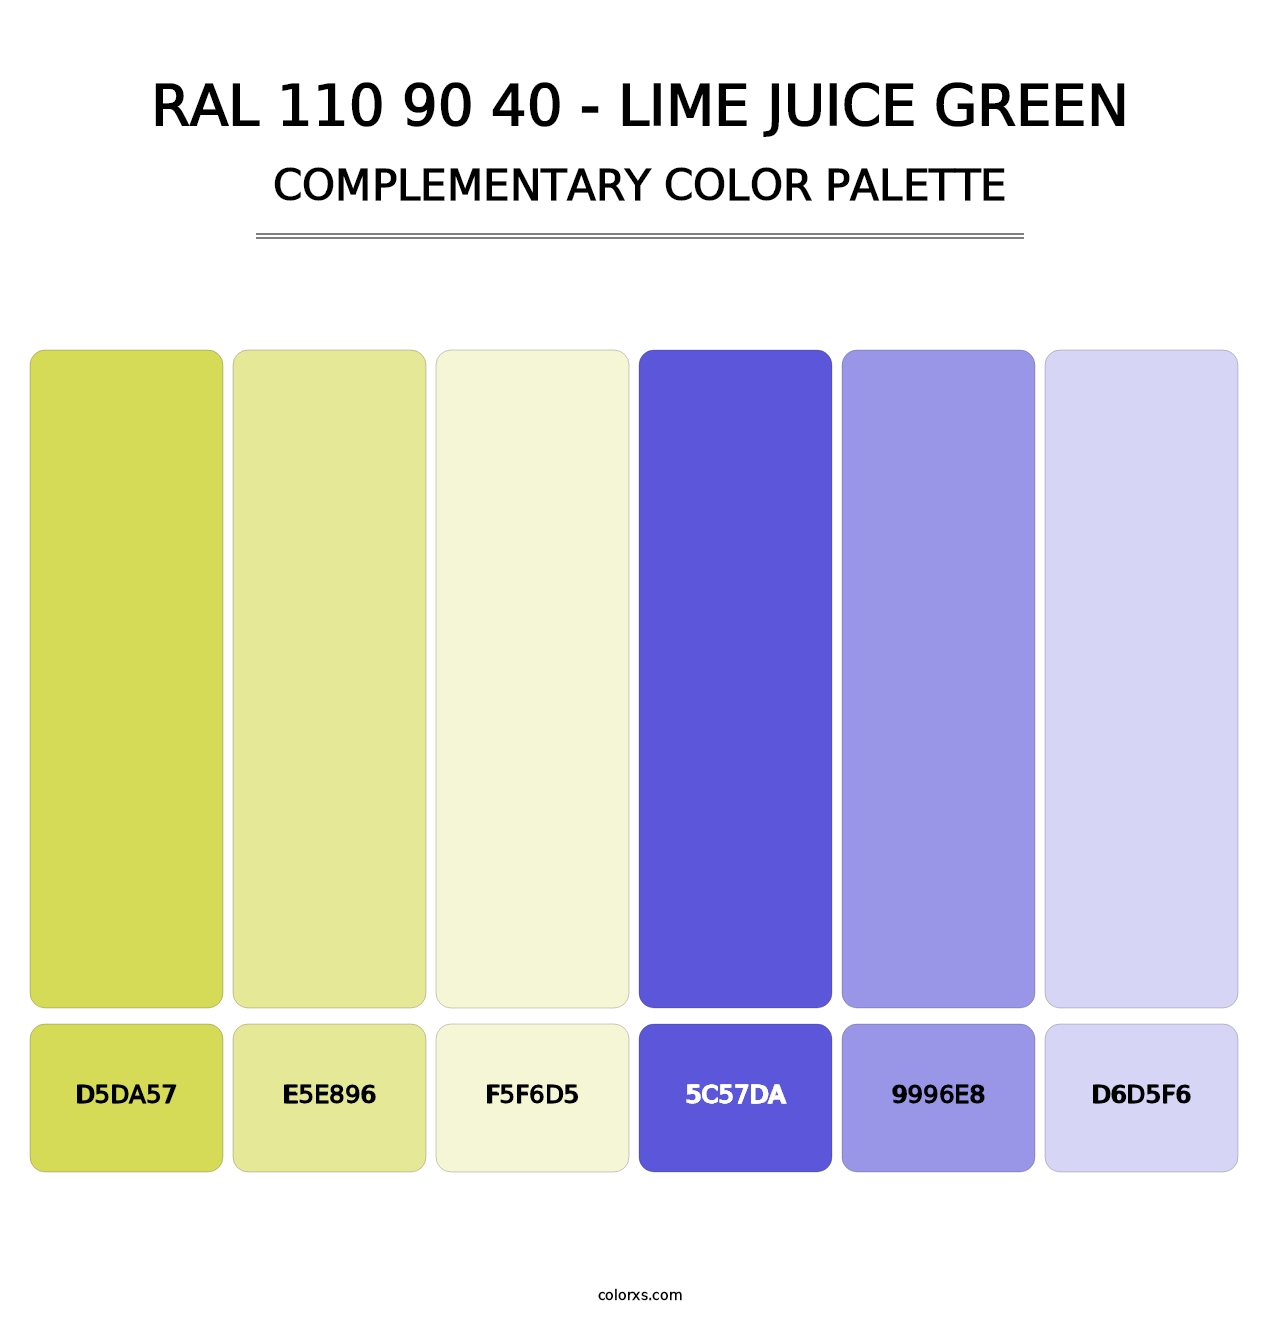 RAL 110 90 40 - Lime Juice Green - Complementary Color Palette